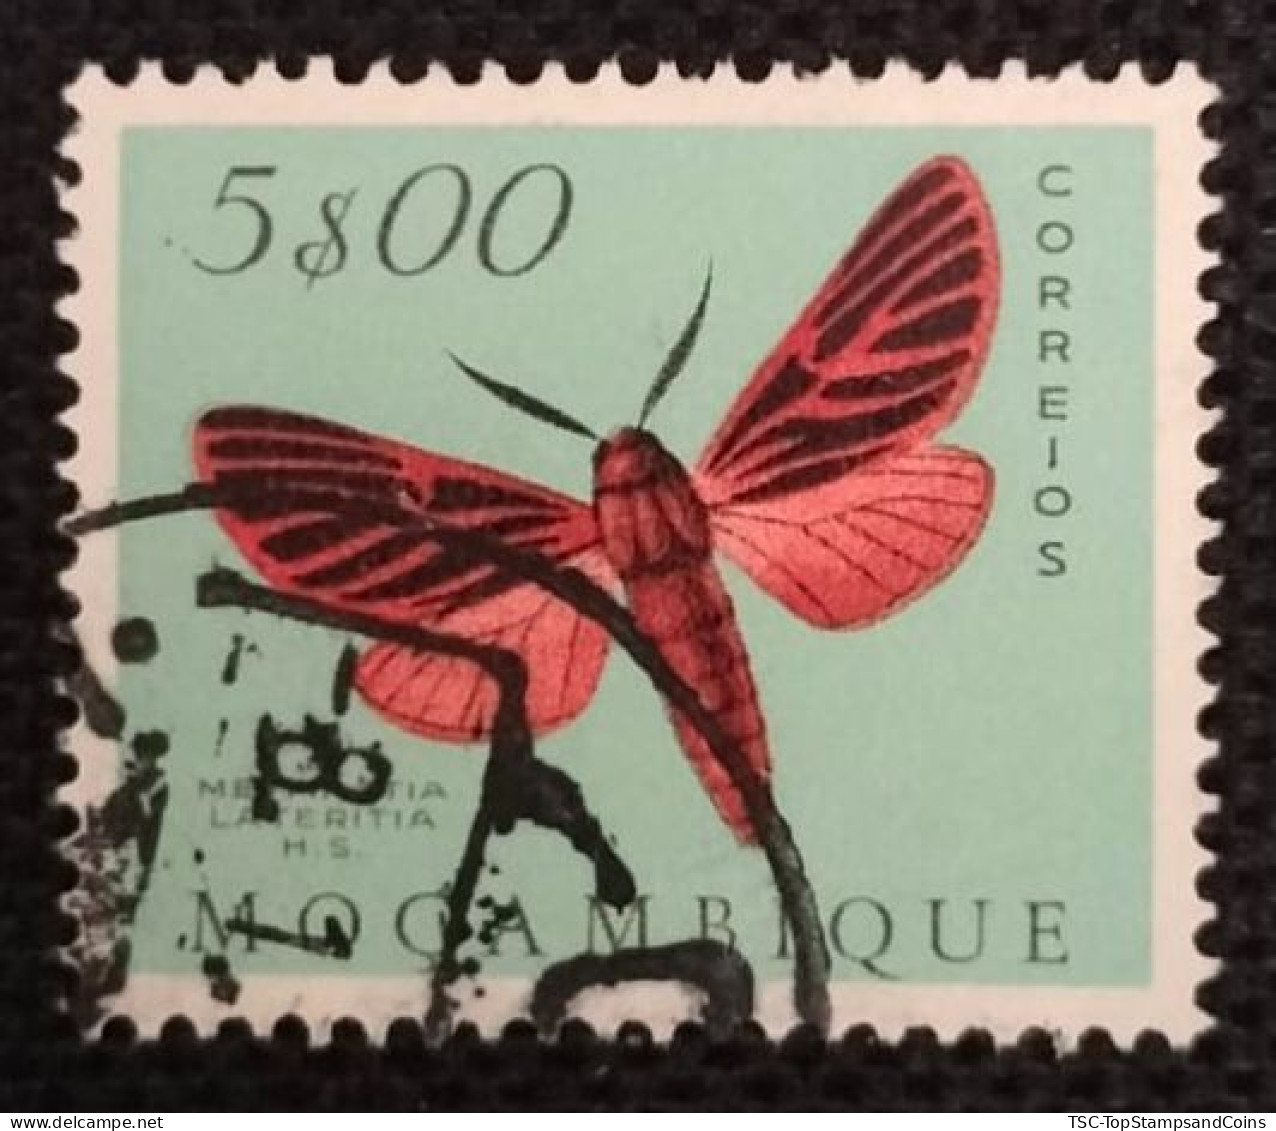 MOZPO0403UG - Mozambique Butterflies  - 5$00 Used Stamp - Mozambique - 1953 - Mozambique